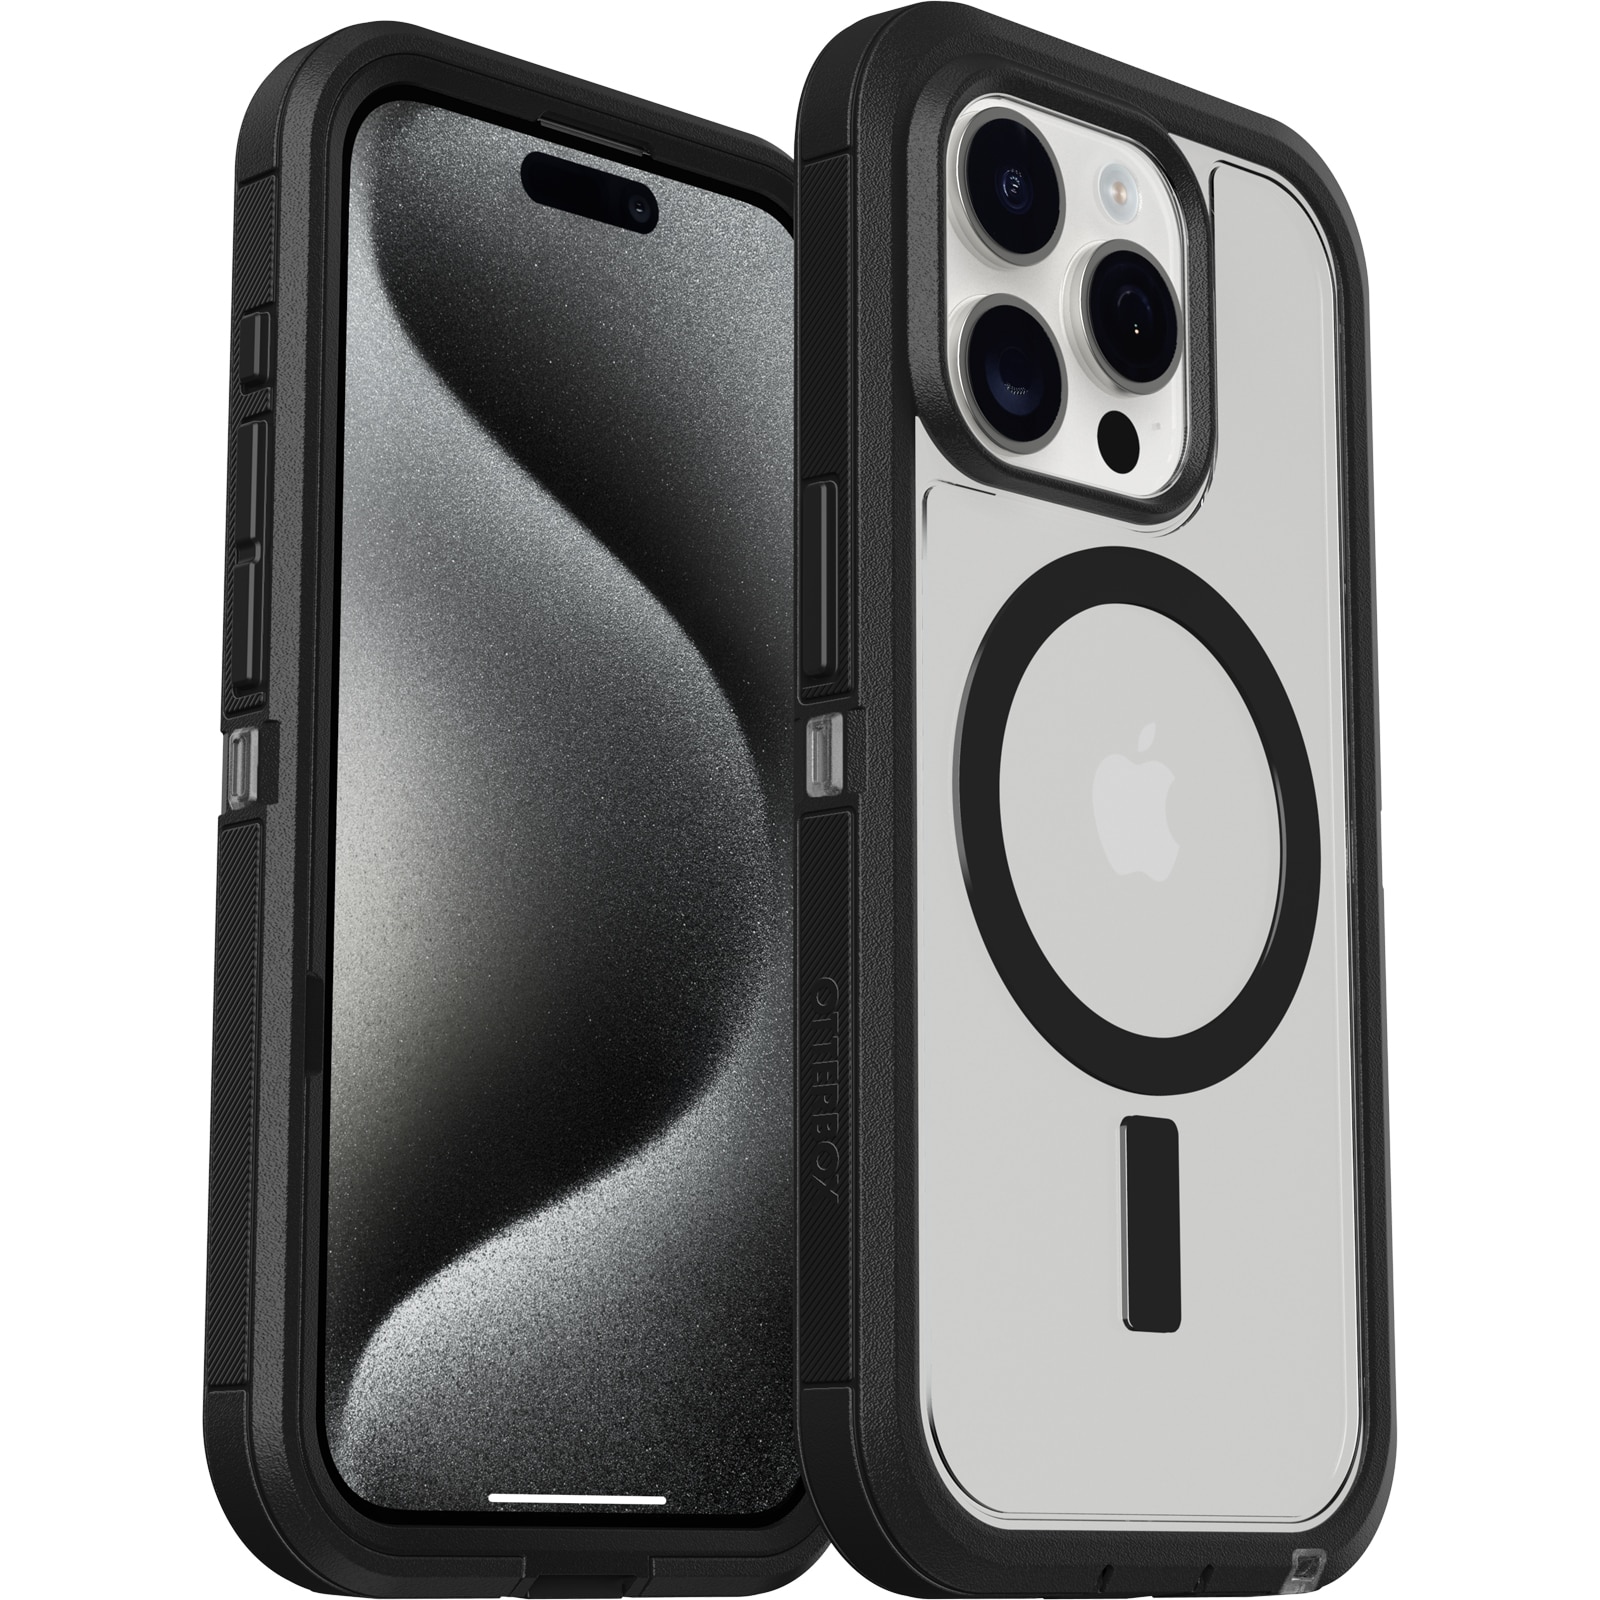 Cover Defender XT iPhone 15 Pro Clear/Black